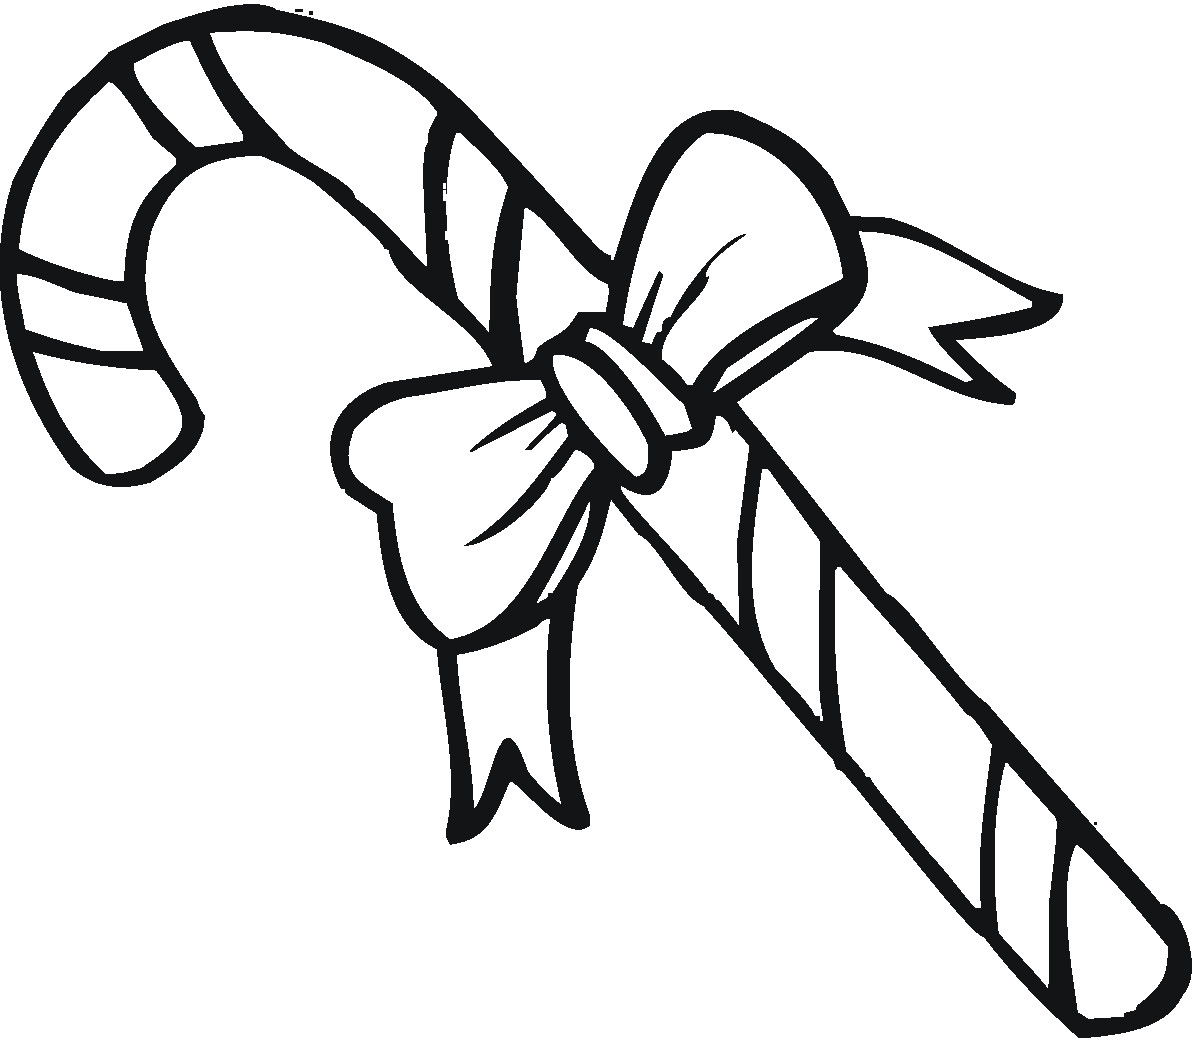 Christmas Candy Cane Coloring Pages
 Christmas Candy Canes Coloring Pages To Tree Decorating